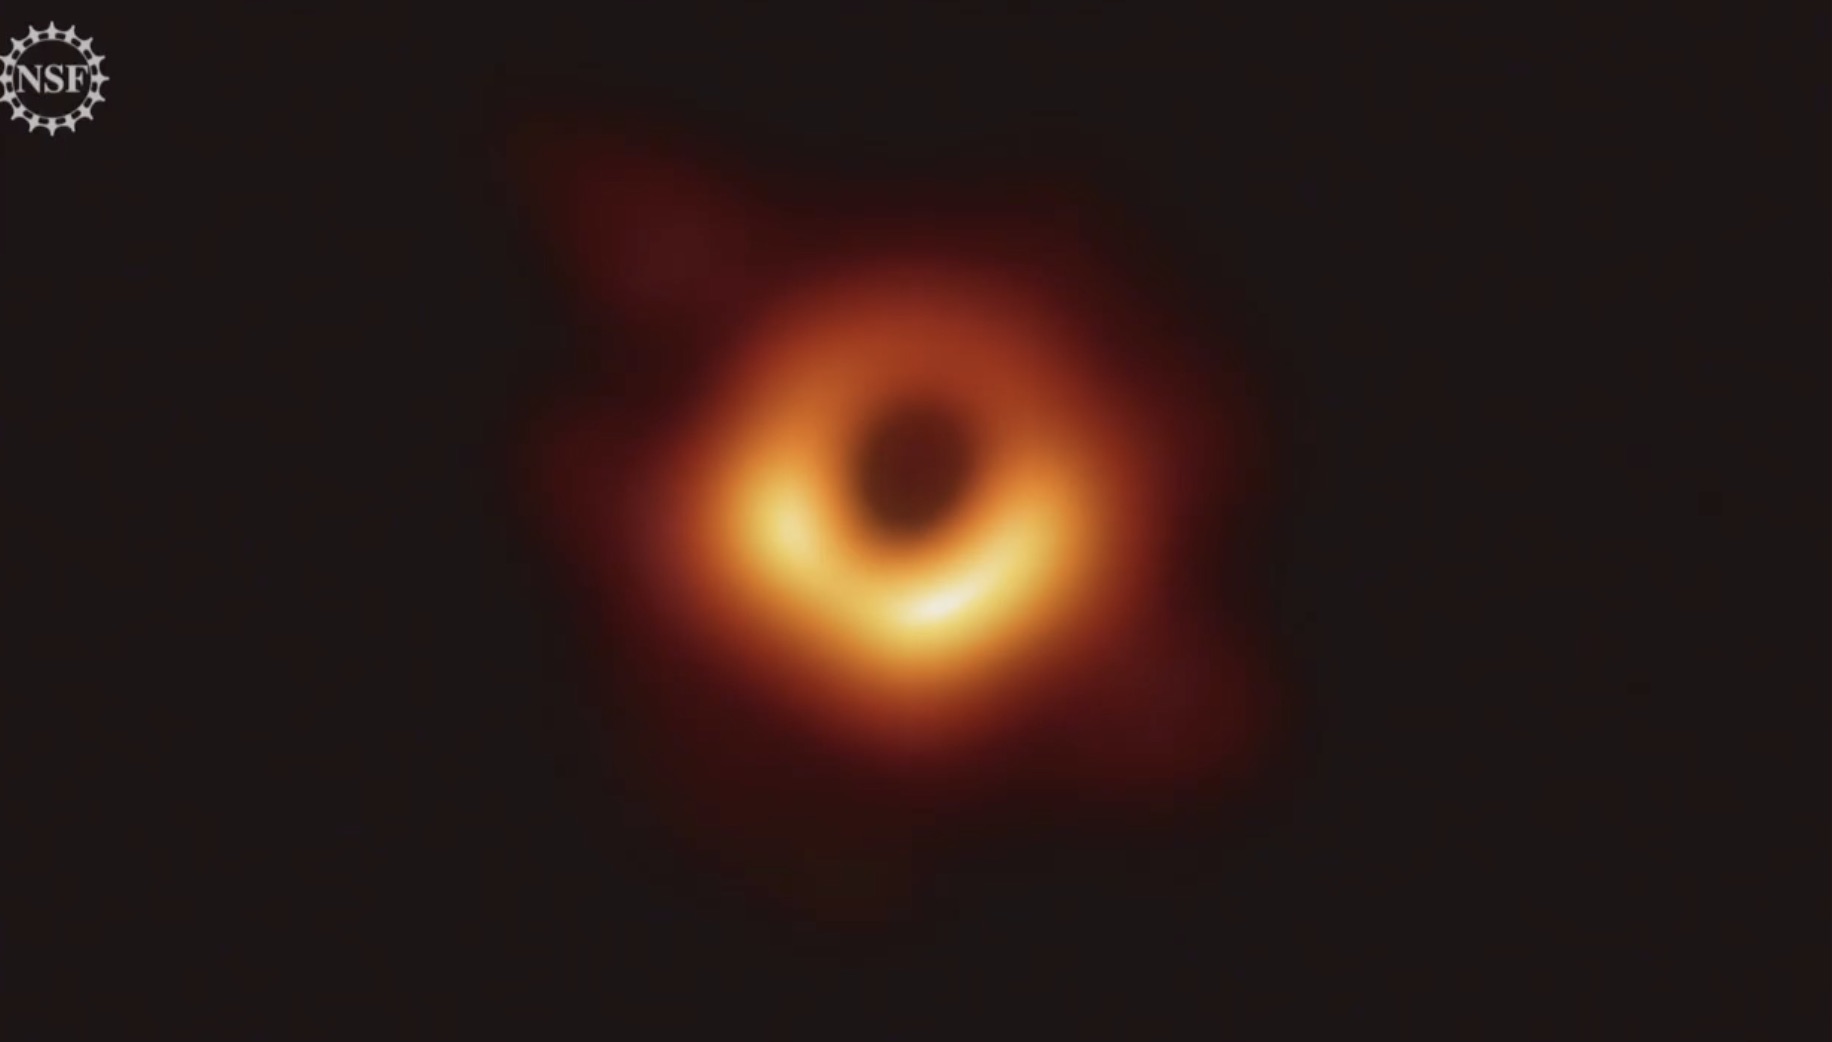 This is the first-ever image of a black hole as seen by the Event Horizon Telescope.